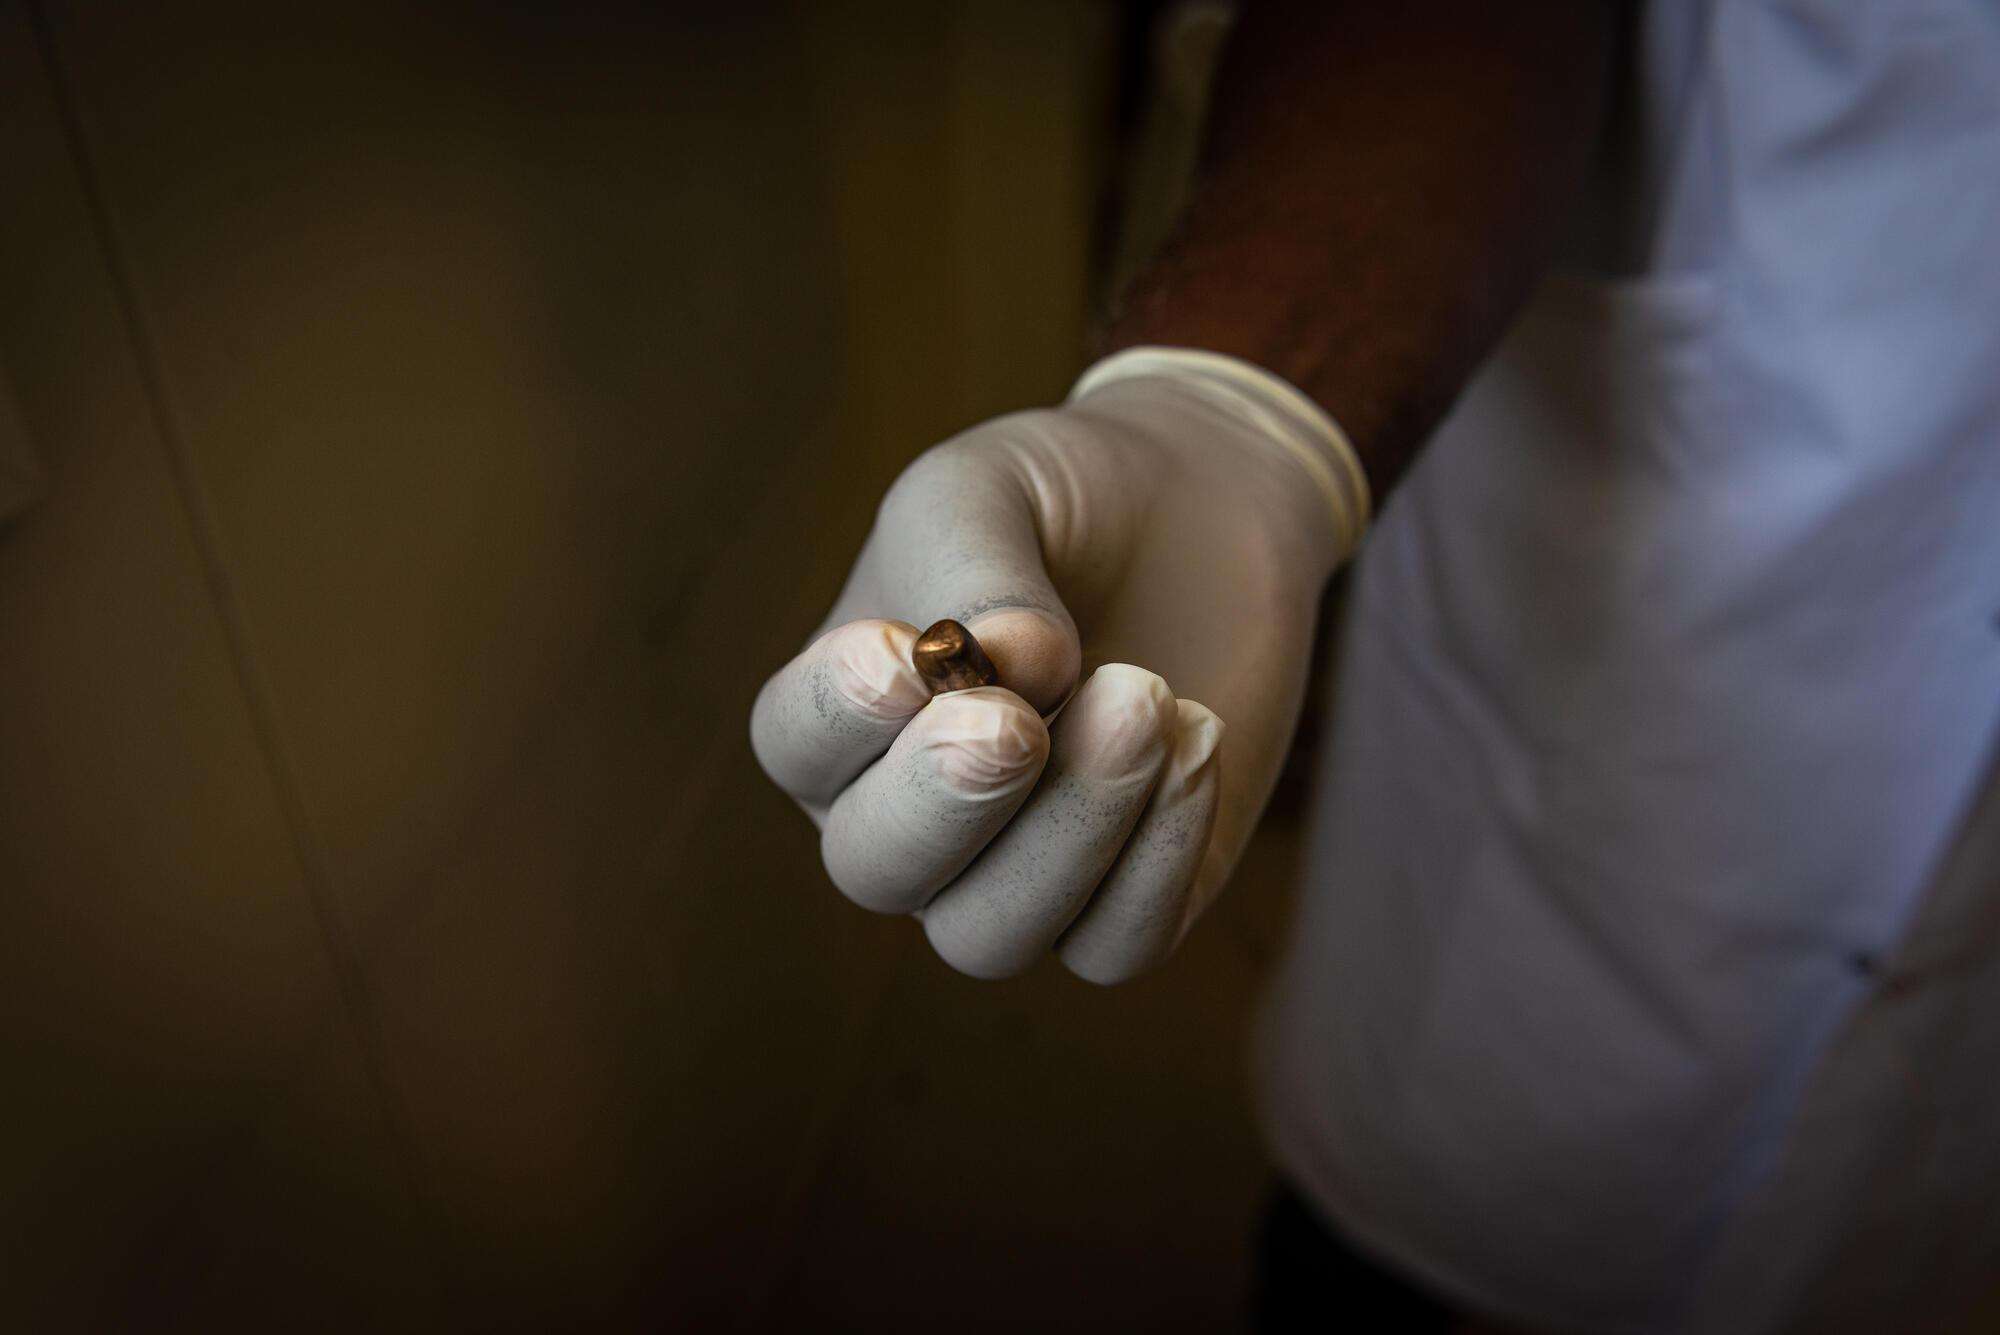 An MSF team member's hand in a surgical latex glove holding a bullet extracted from a patient in Haiti